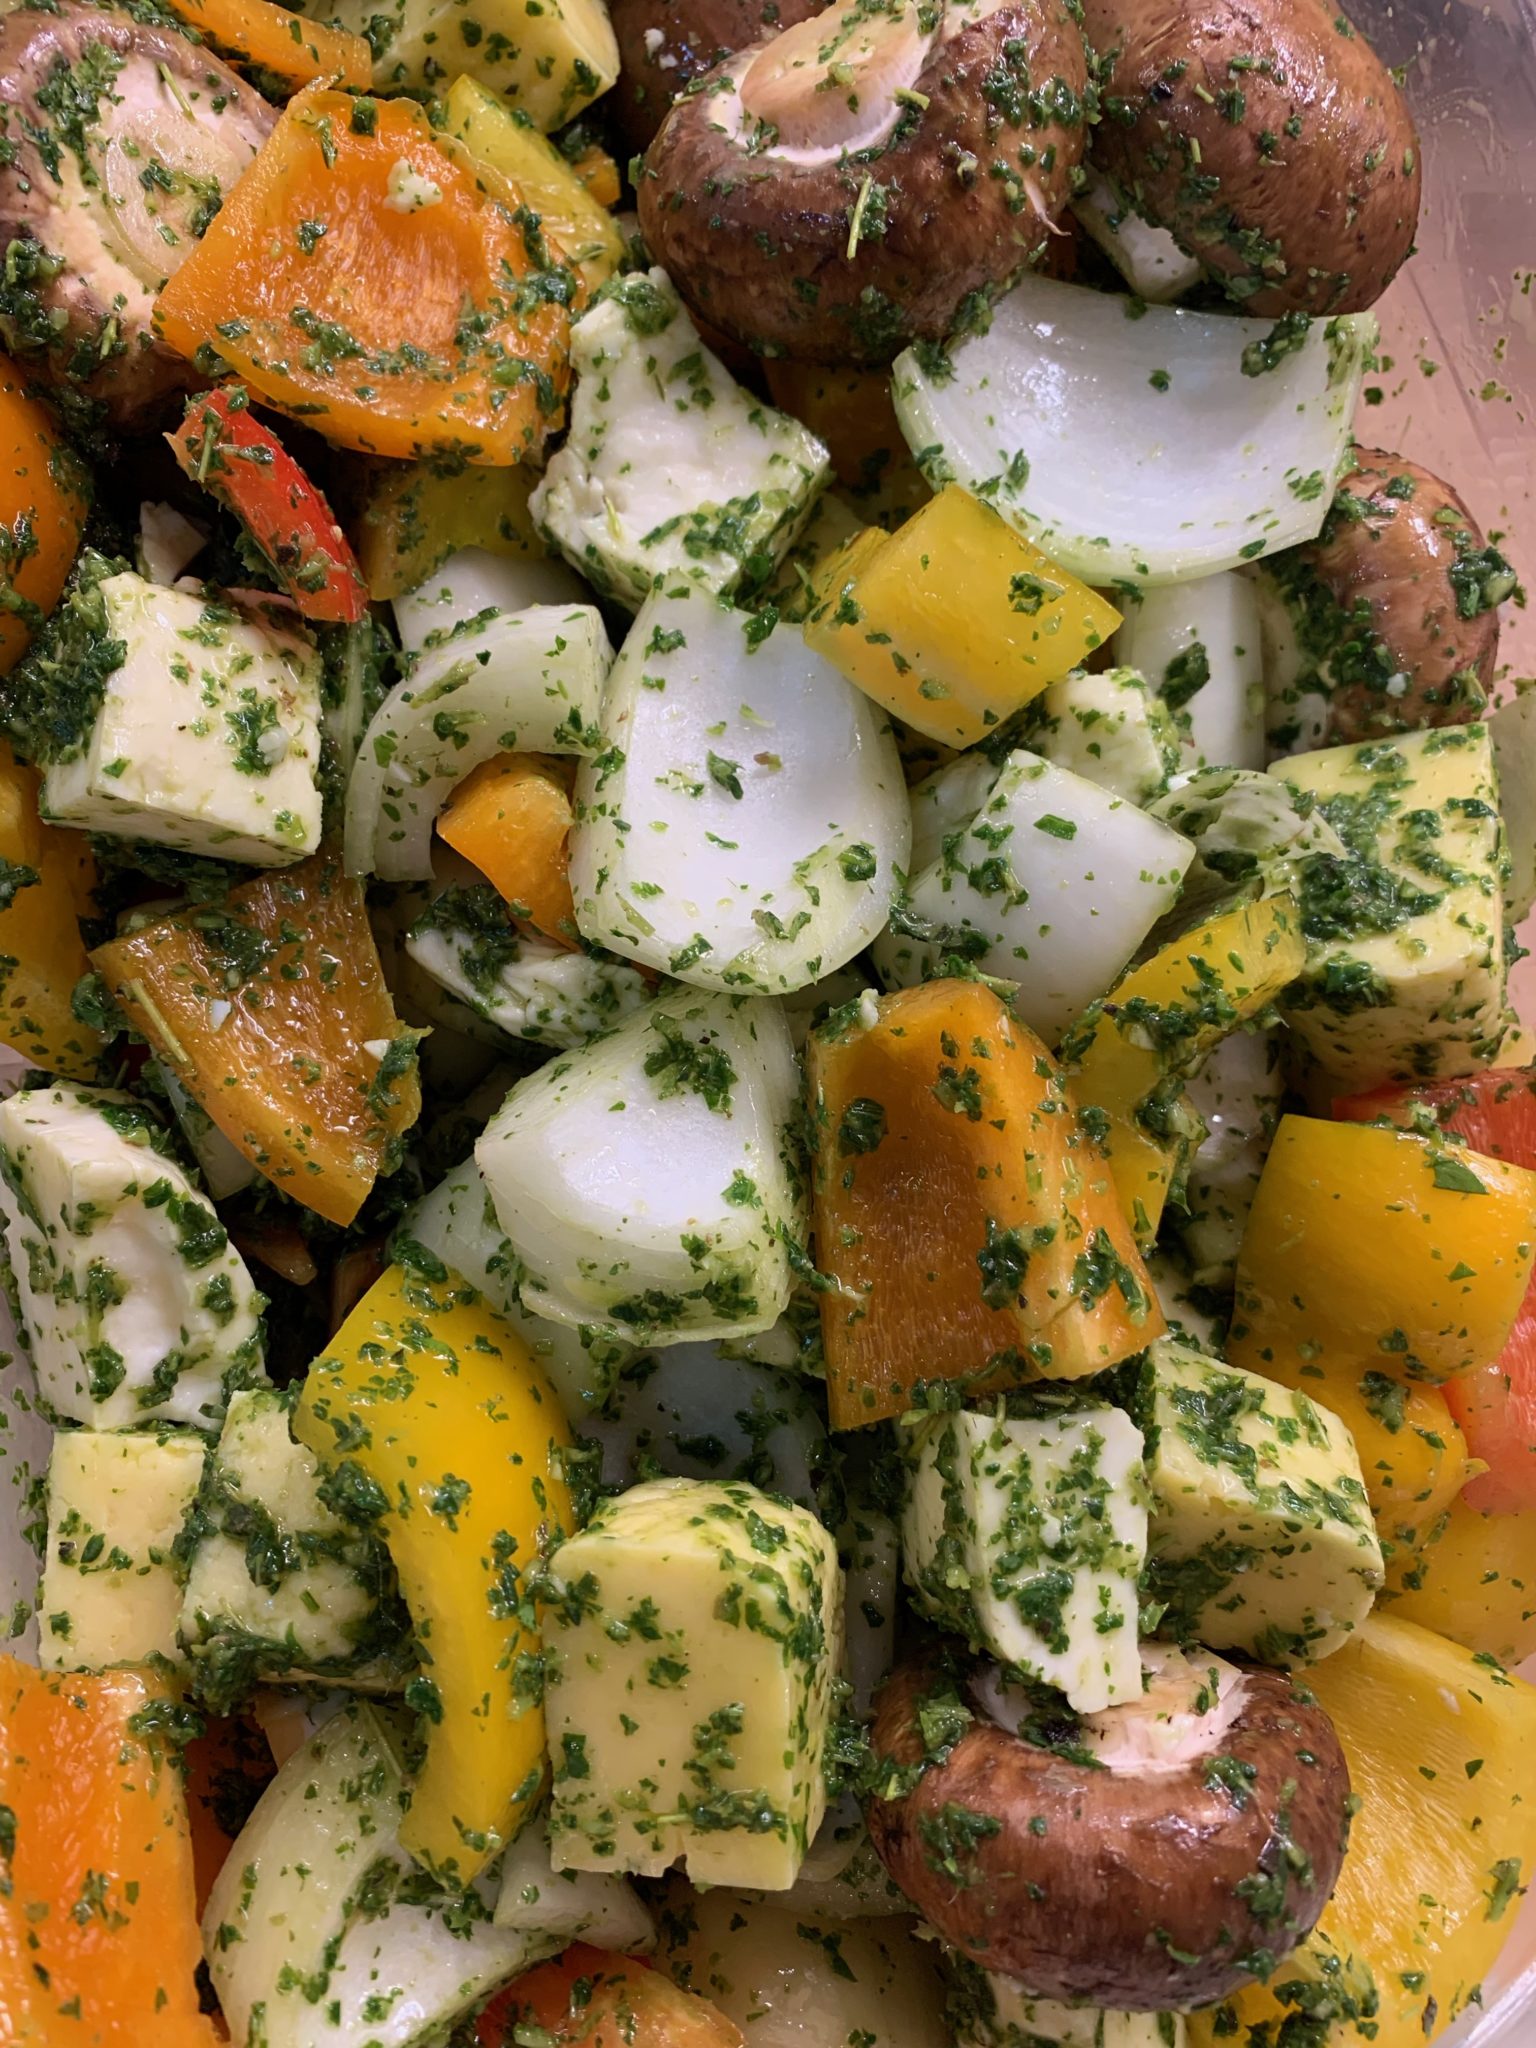 Herb marinade on vegetables and cheese